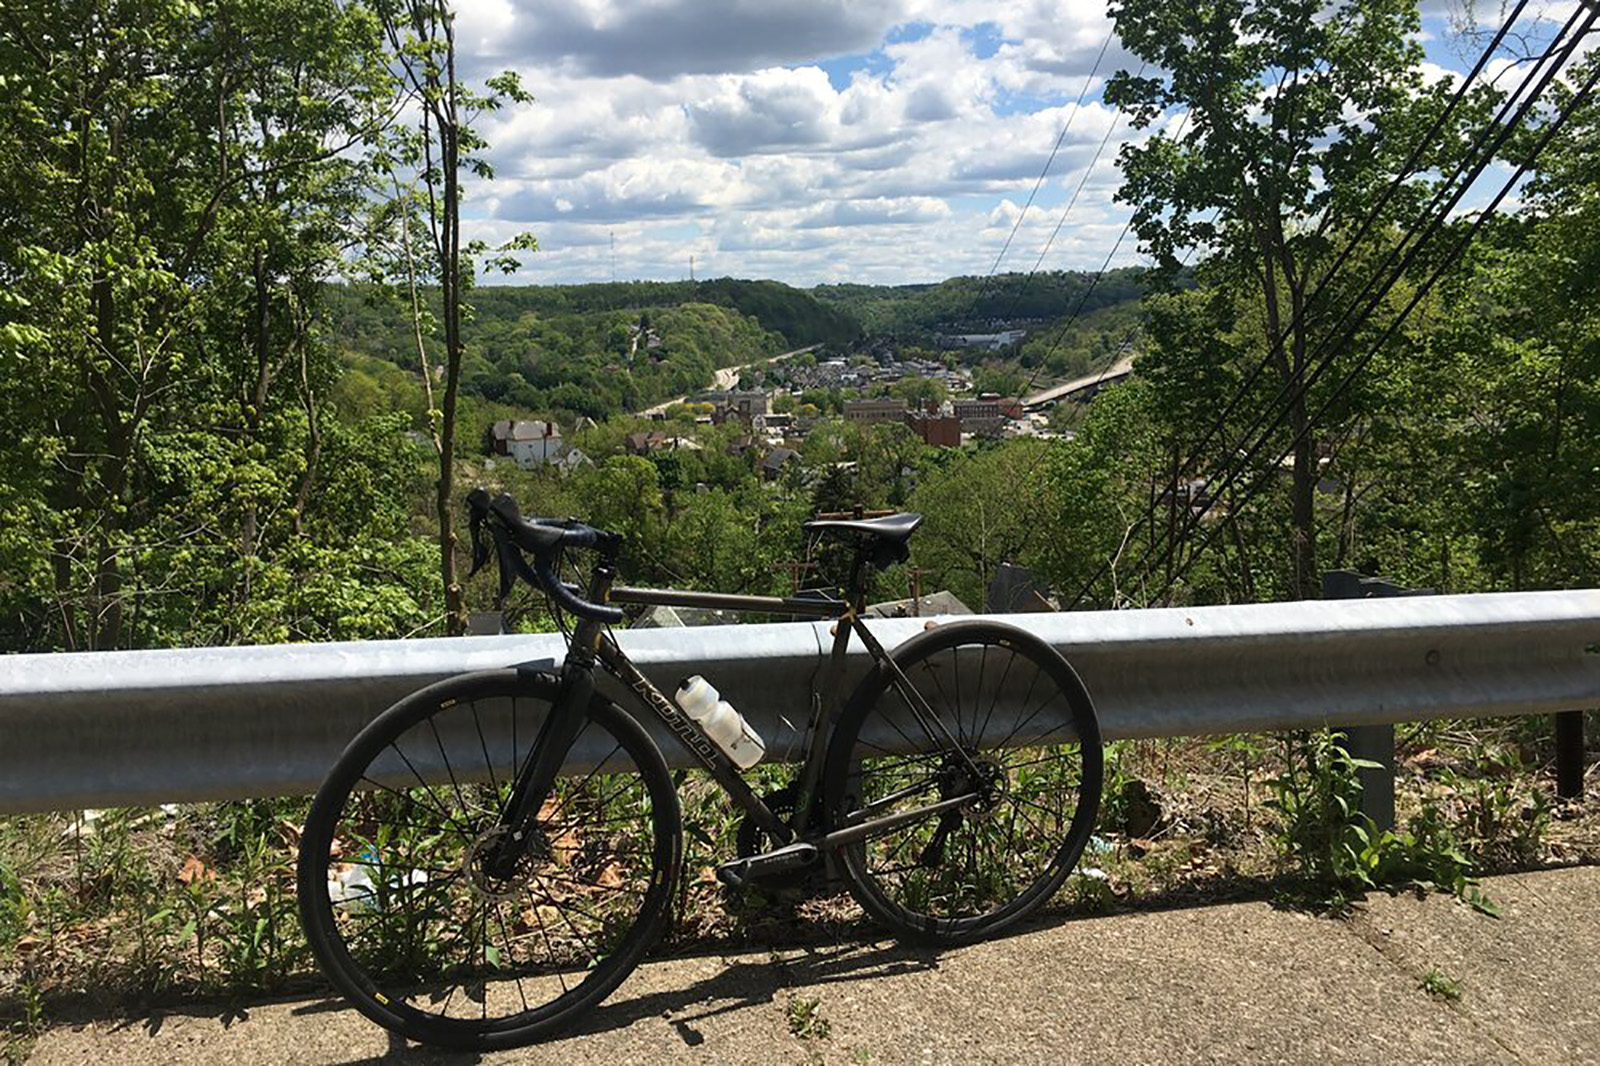 Photo of a bike leaning against a guardrail, with a view of Pittsburgh hills in the background